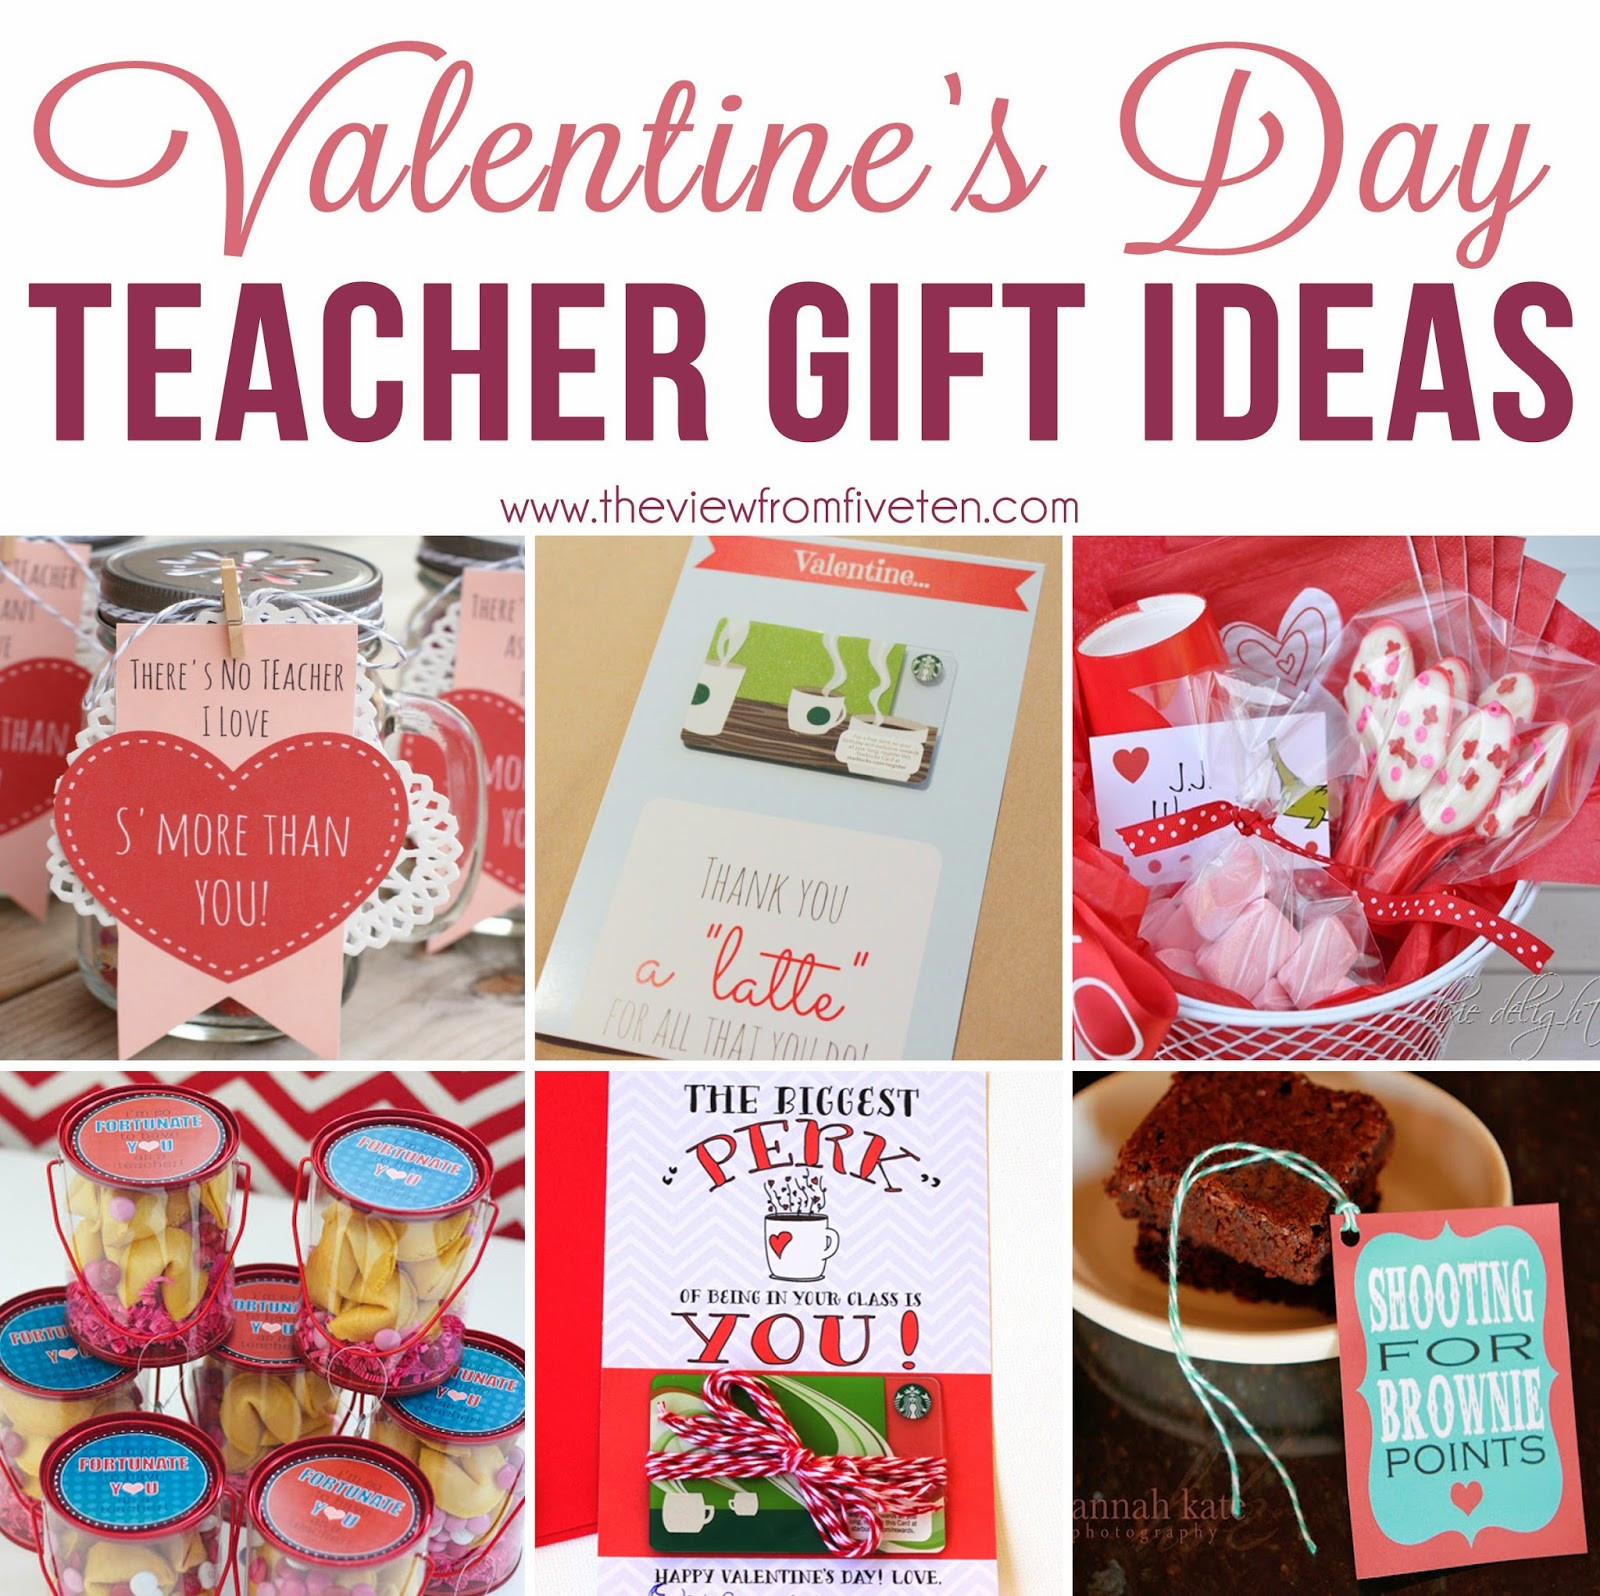 Valentines Gift Ideas For Teachers
 Top 10 Valentines Day Gifts Ideas for Teachers 2020 A